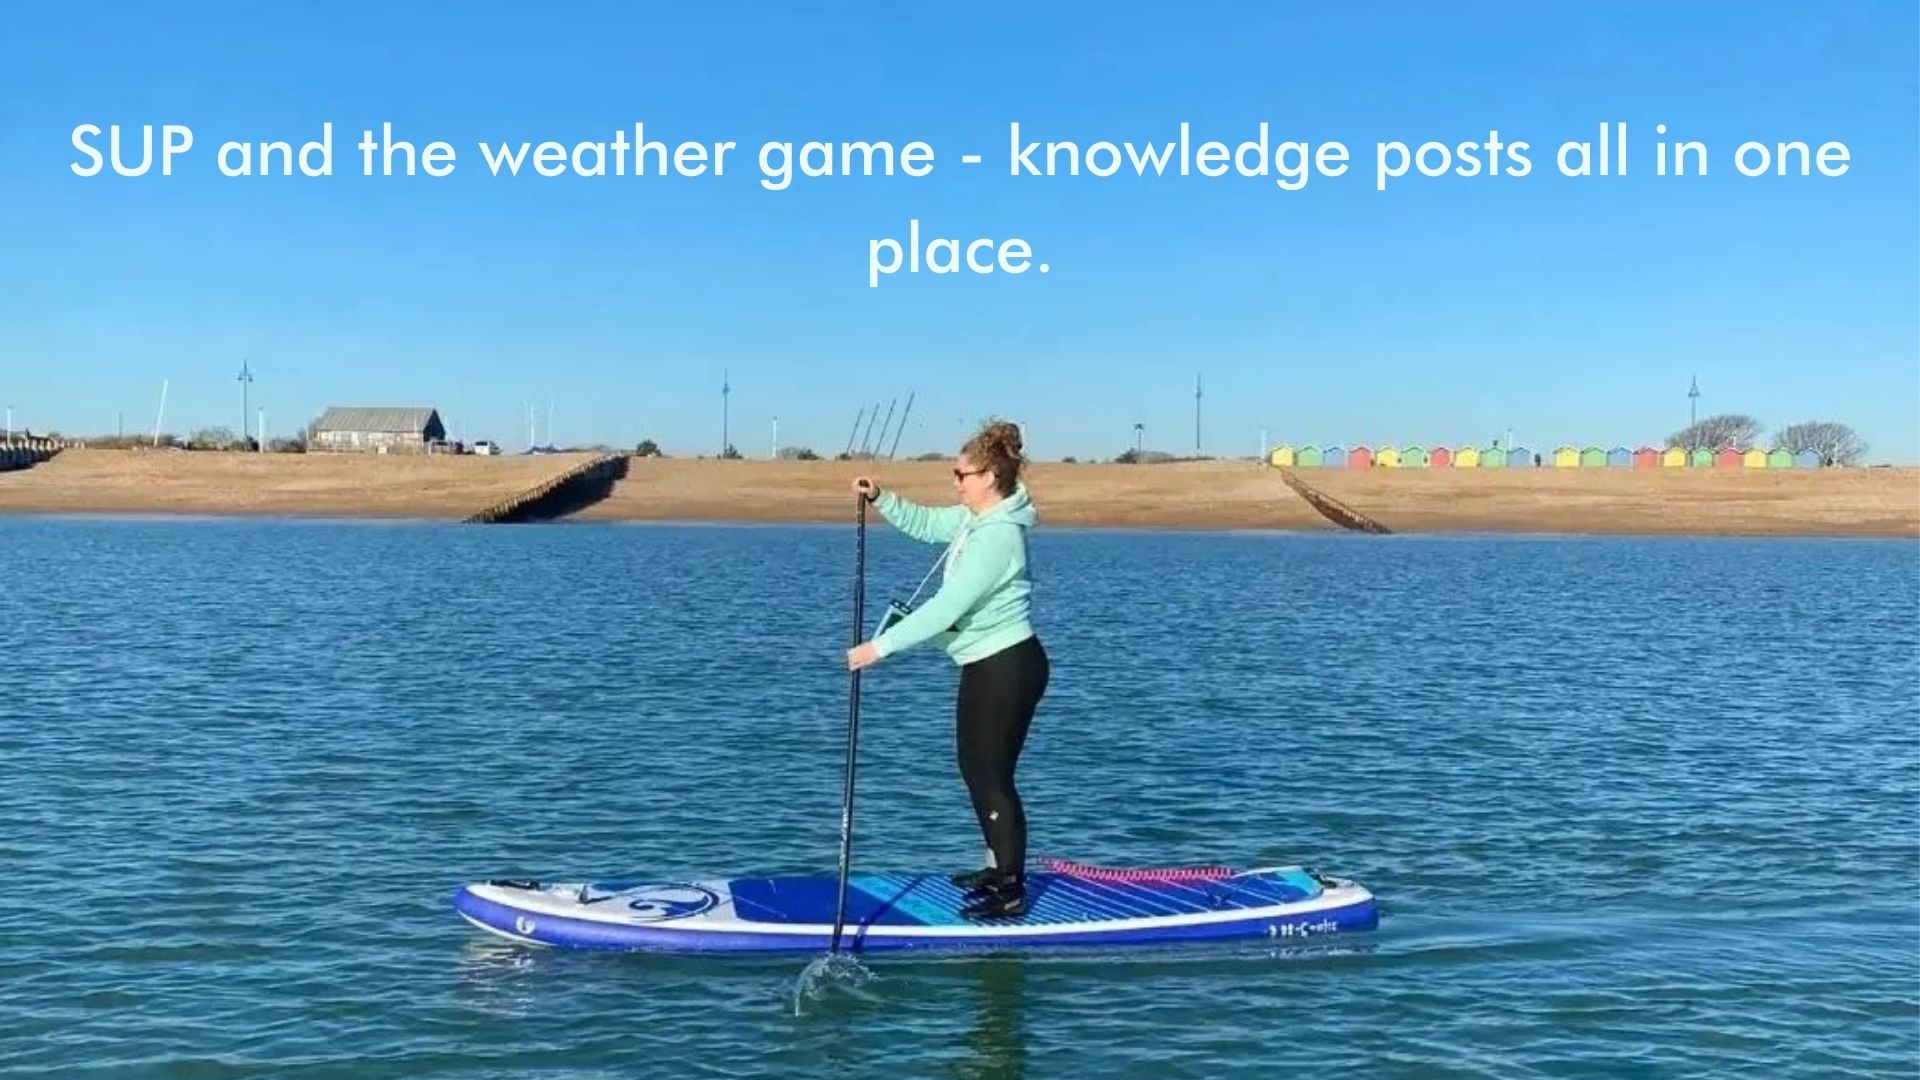 SUP and the weather game - knowledge posts all in one place.